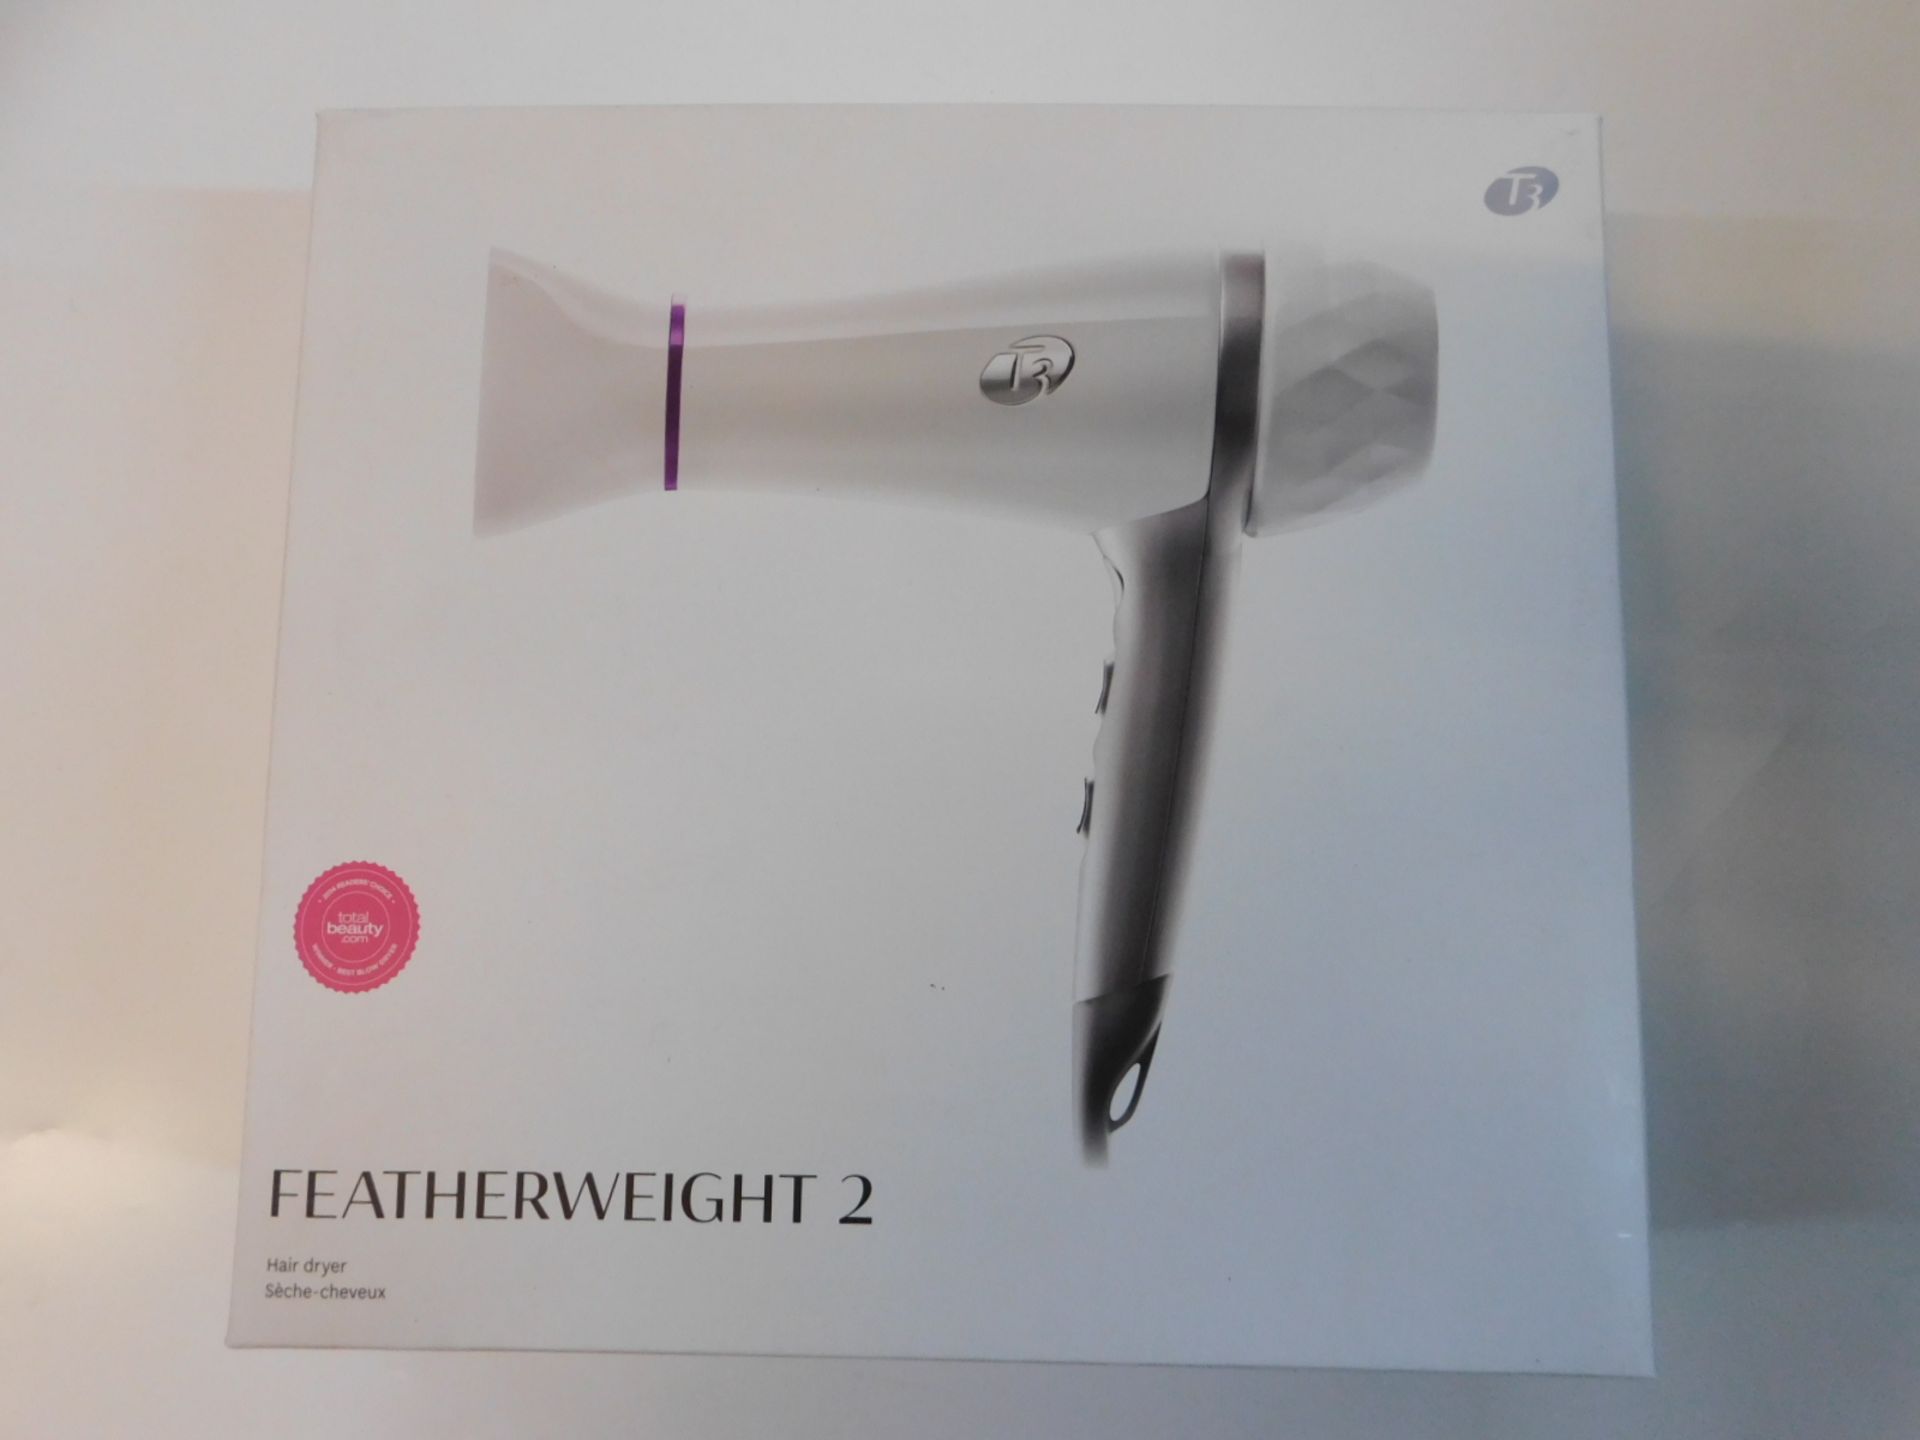 1 BOXED T3 FEATHERWEIGHT 2 1800W HAIR DRYER RRP Â£79.99